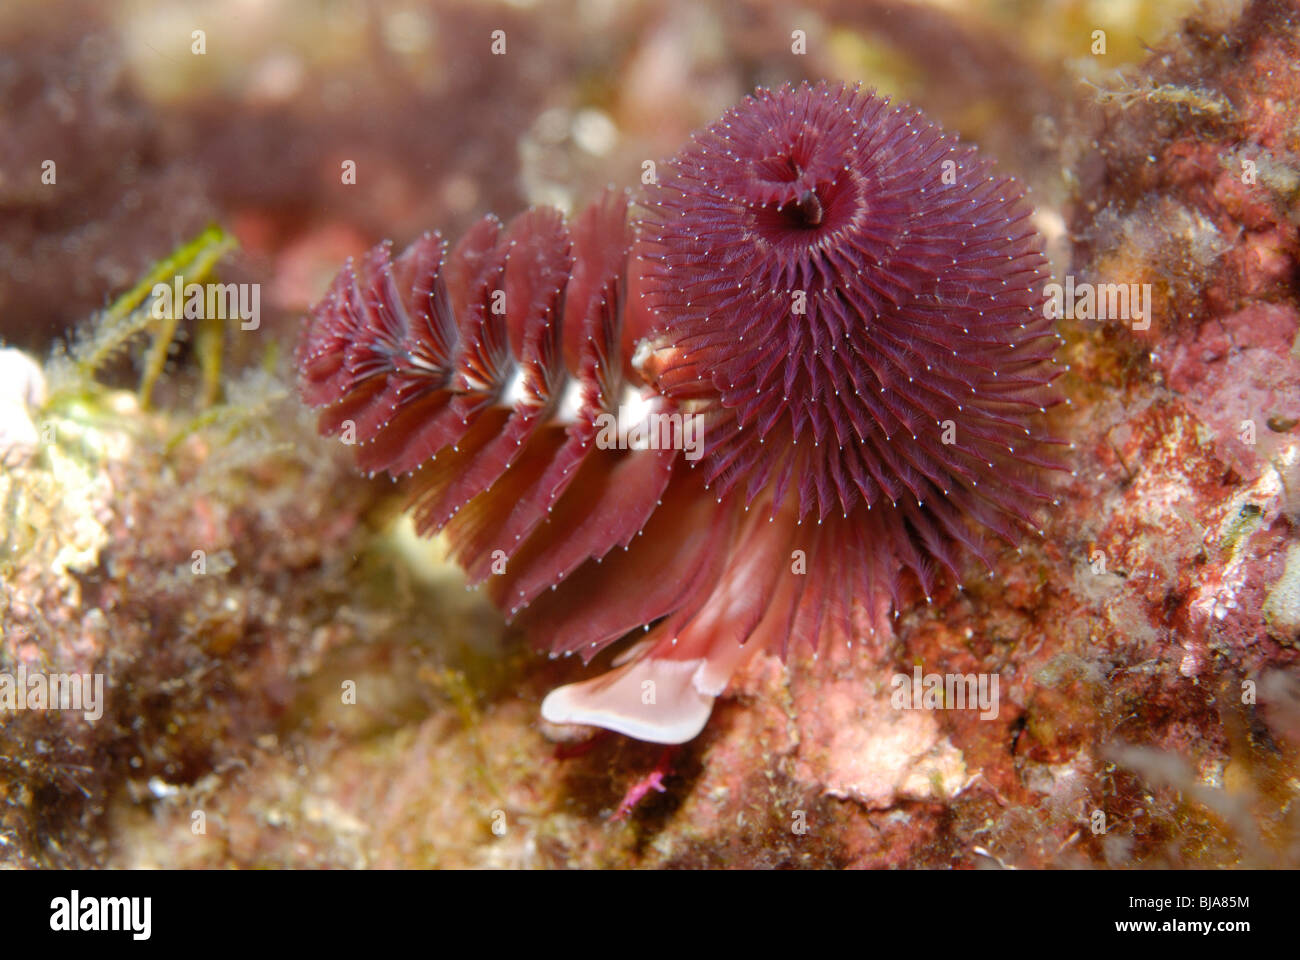 Christmas tree worm in the Gulf of Mexico. Stock Photo